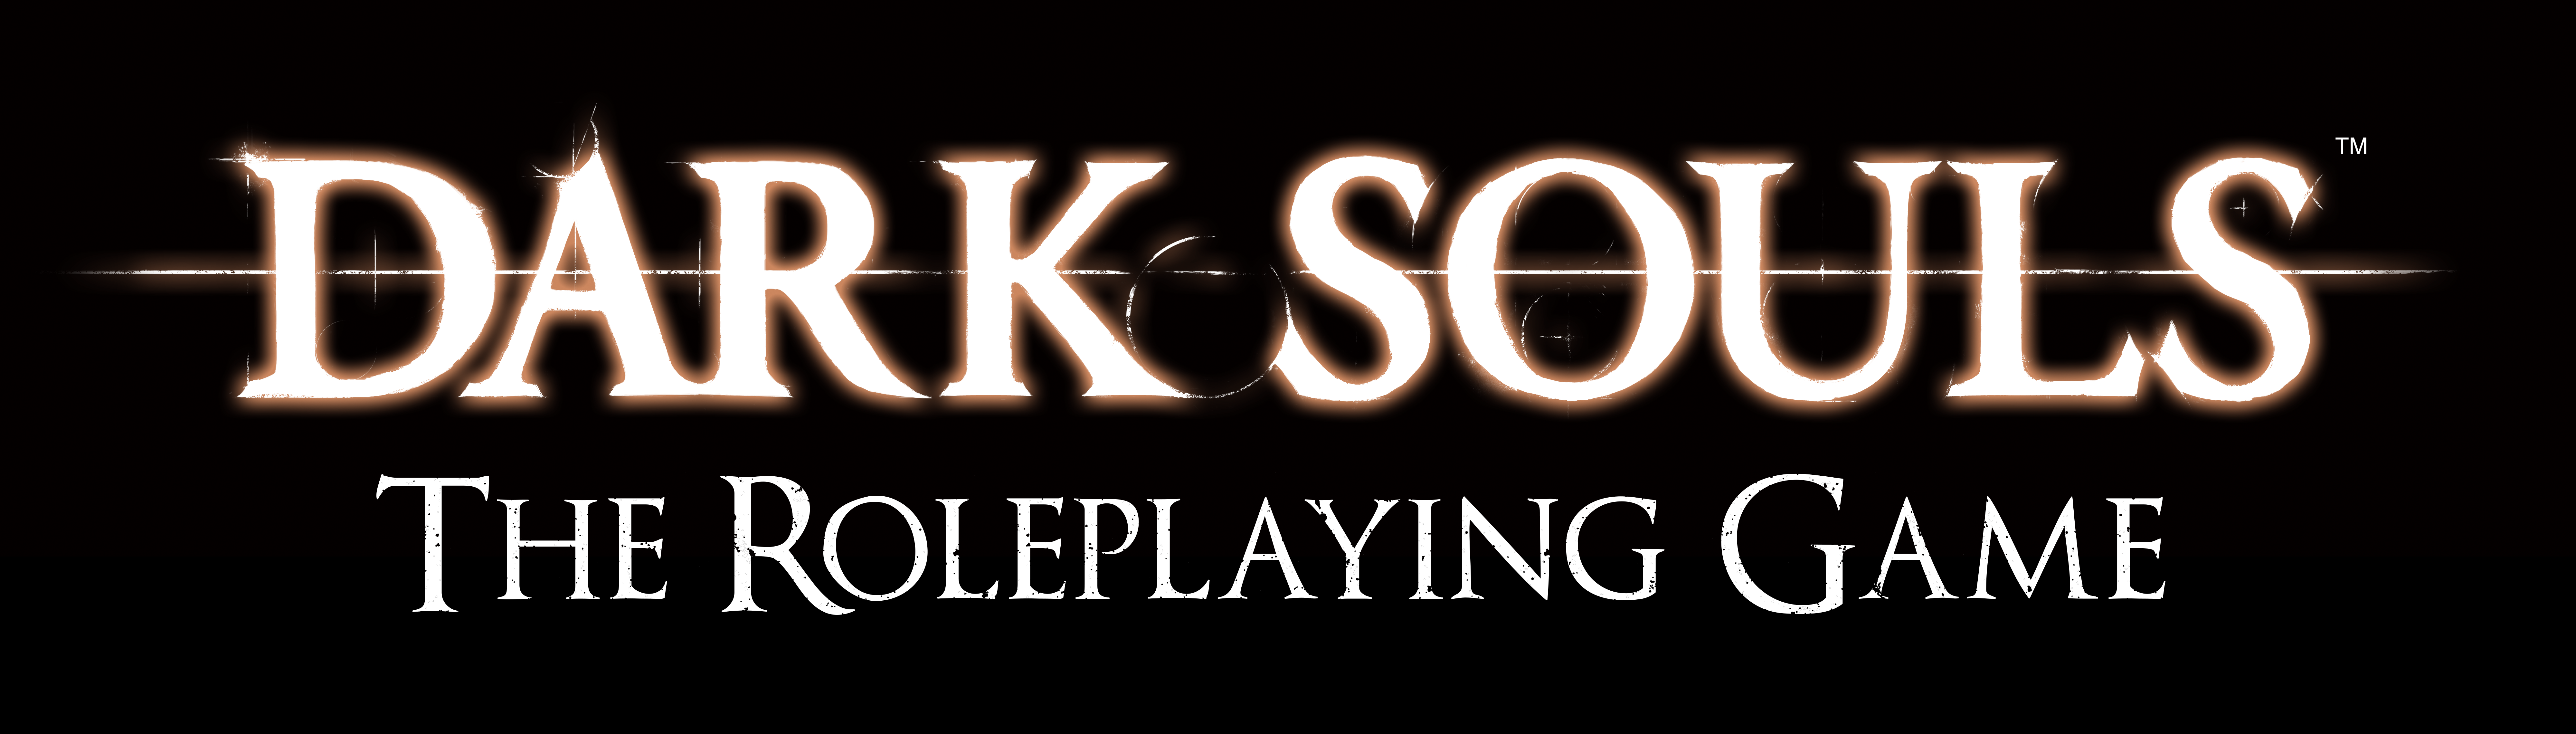 Dark Souls The Roleplaying Game - Steamforged Games